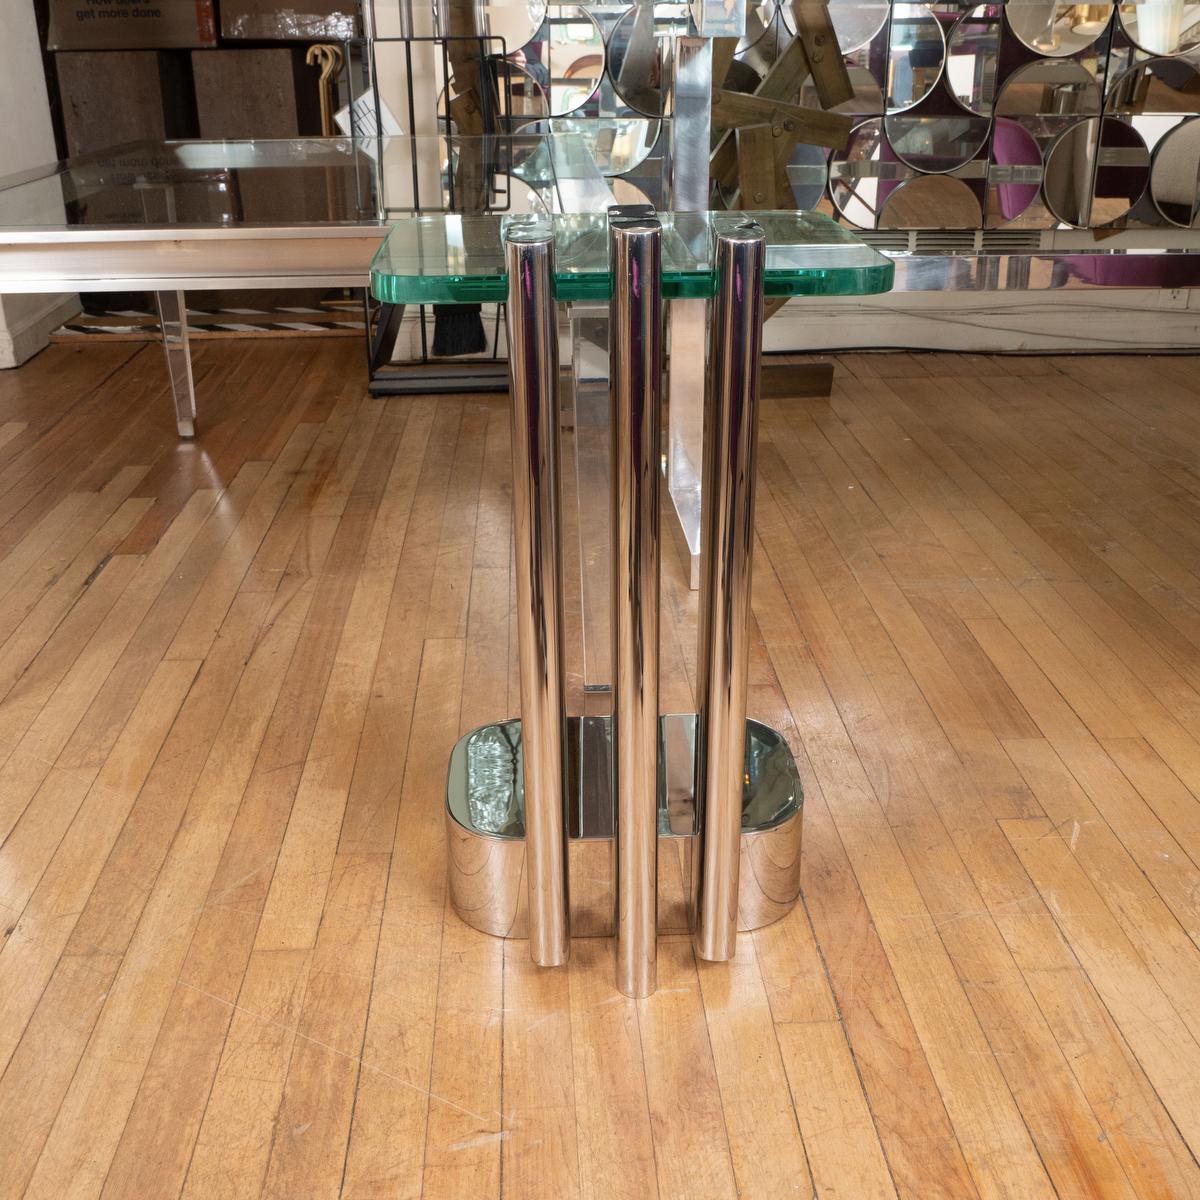 Chrome and glass side table by Les Prismatiques.